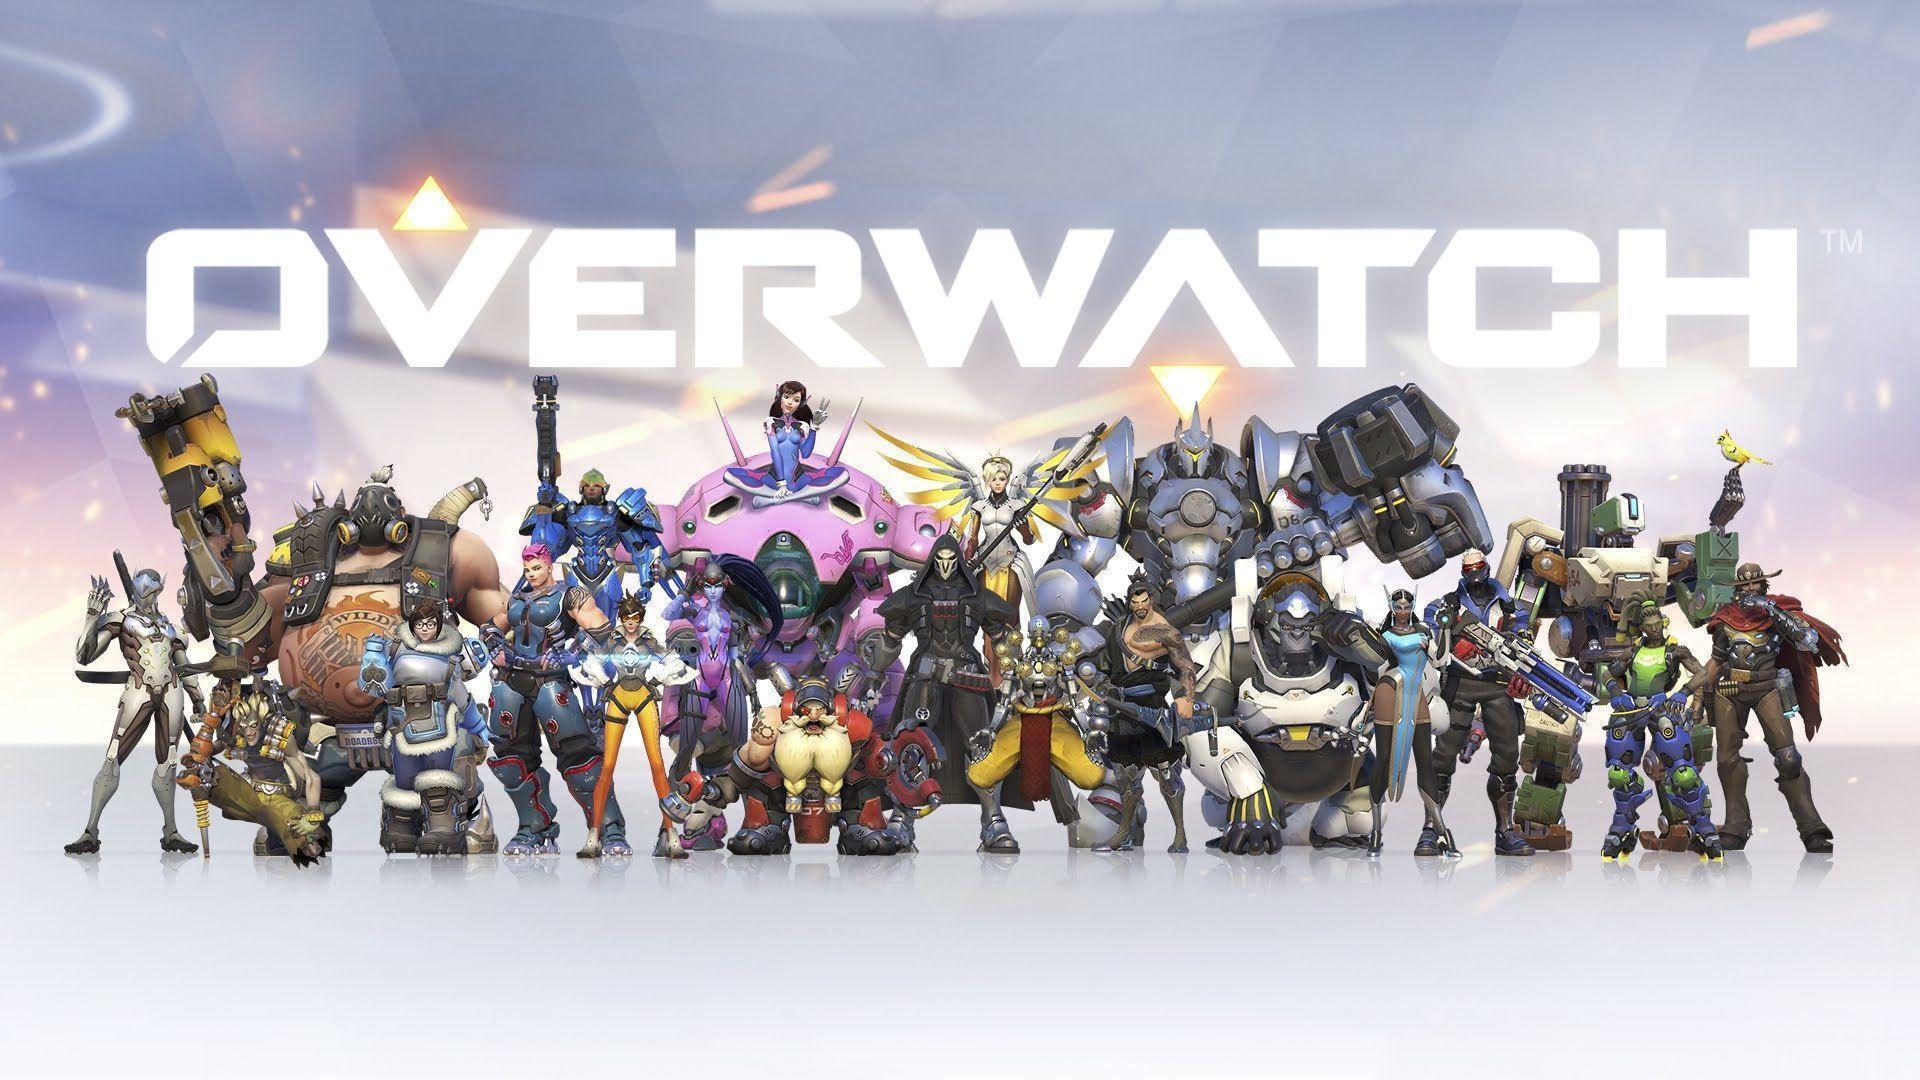 Overwatch Wallpaper Image Photo Picture Background